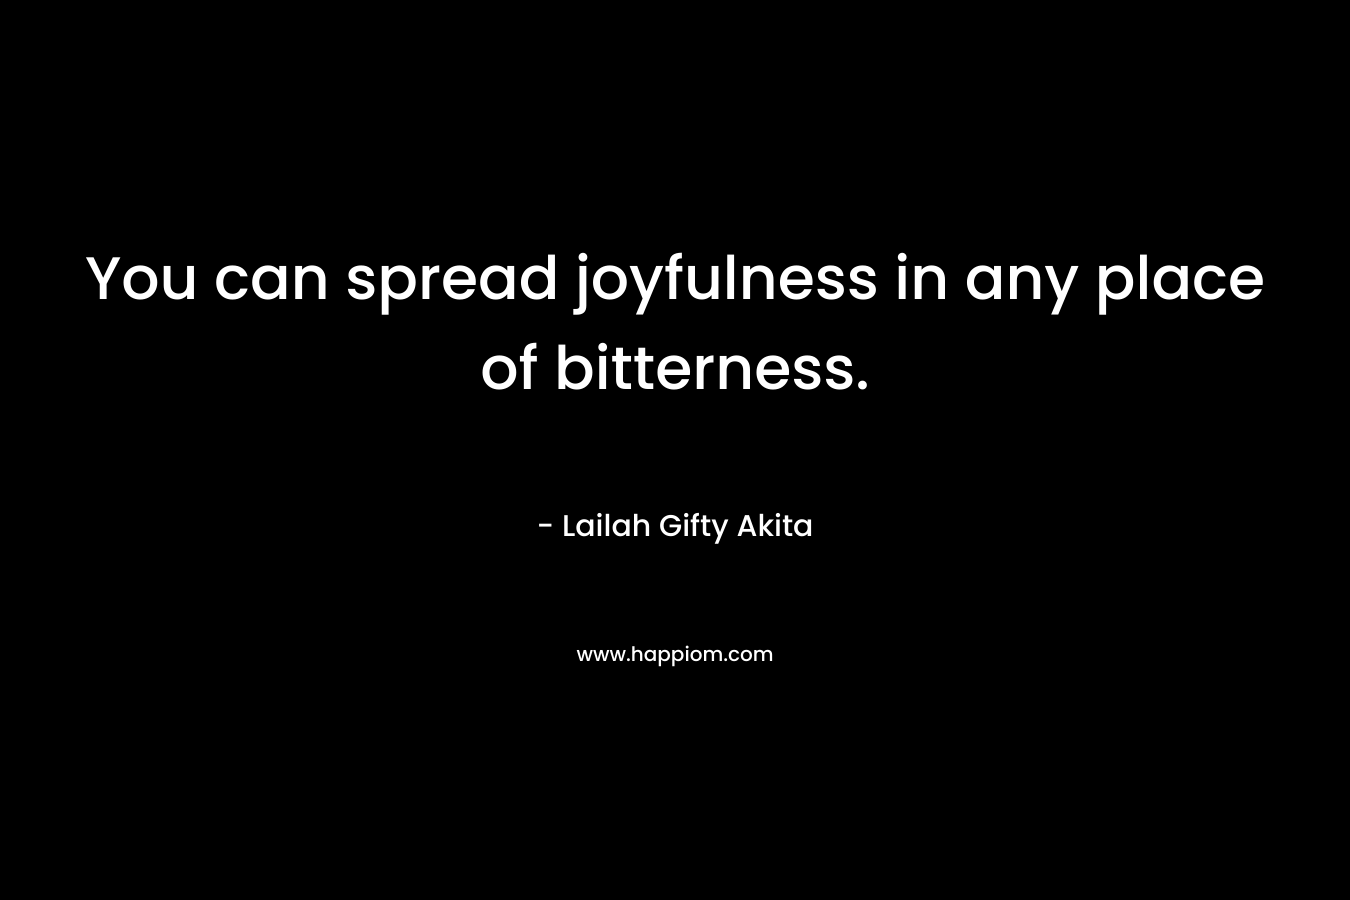 You can spread joyfulness in any place of bitterness.